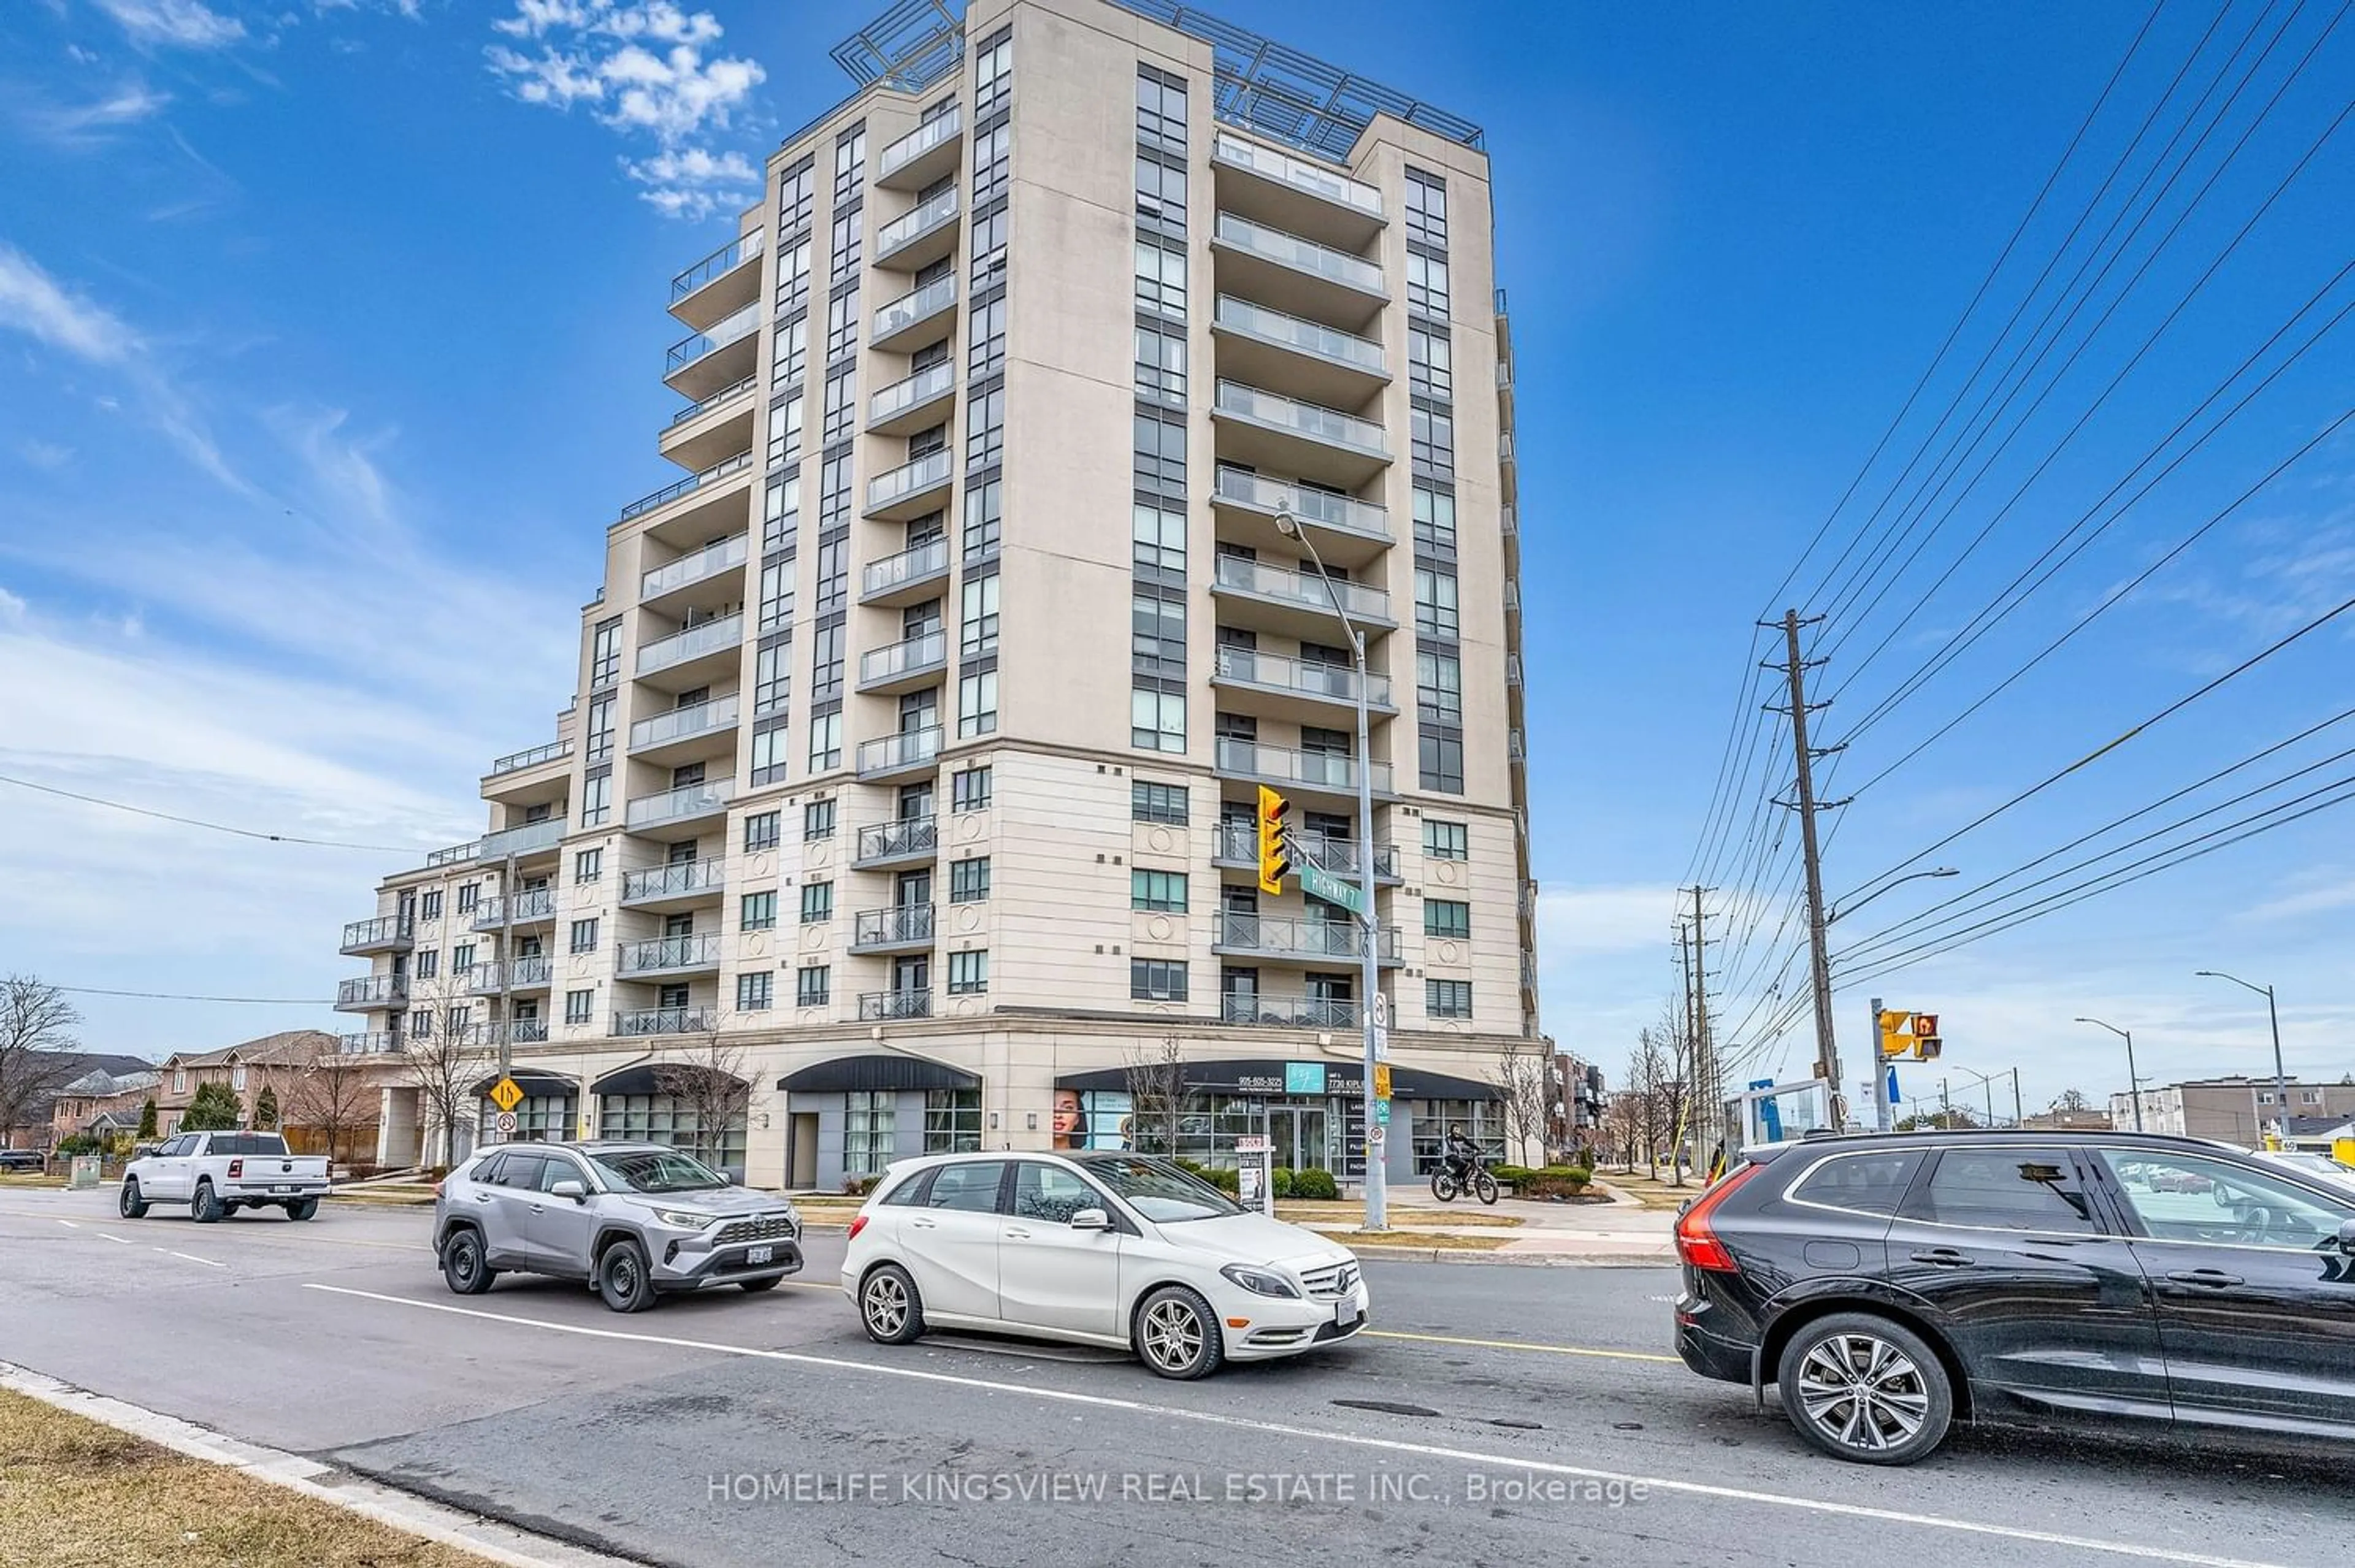 A pic from exterior of the house or condo for 7730 Kipling Ave #206, Vaughan Ontario L4L 1Y7